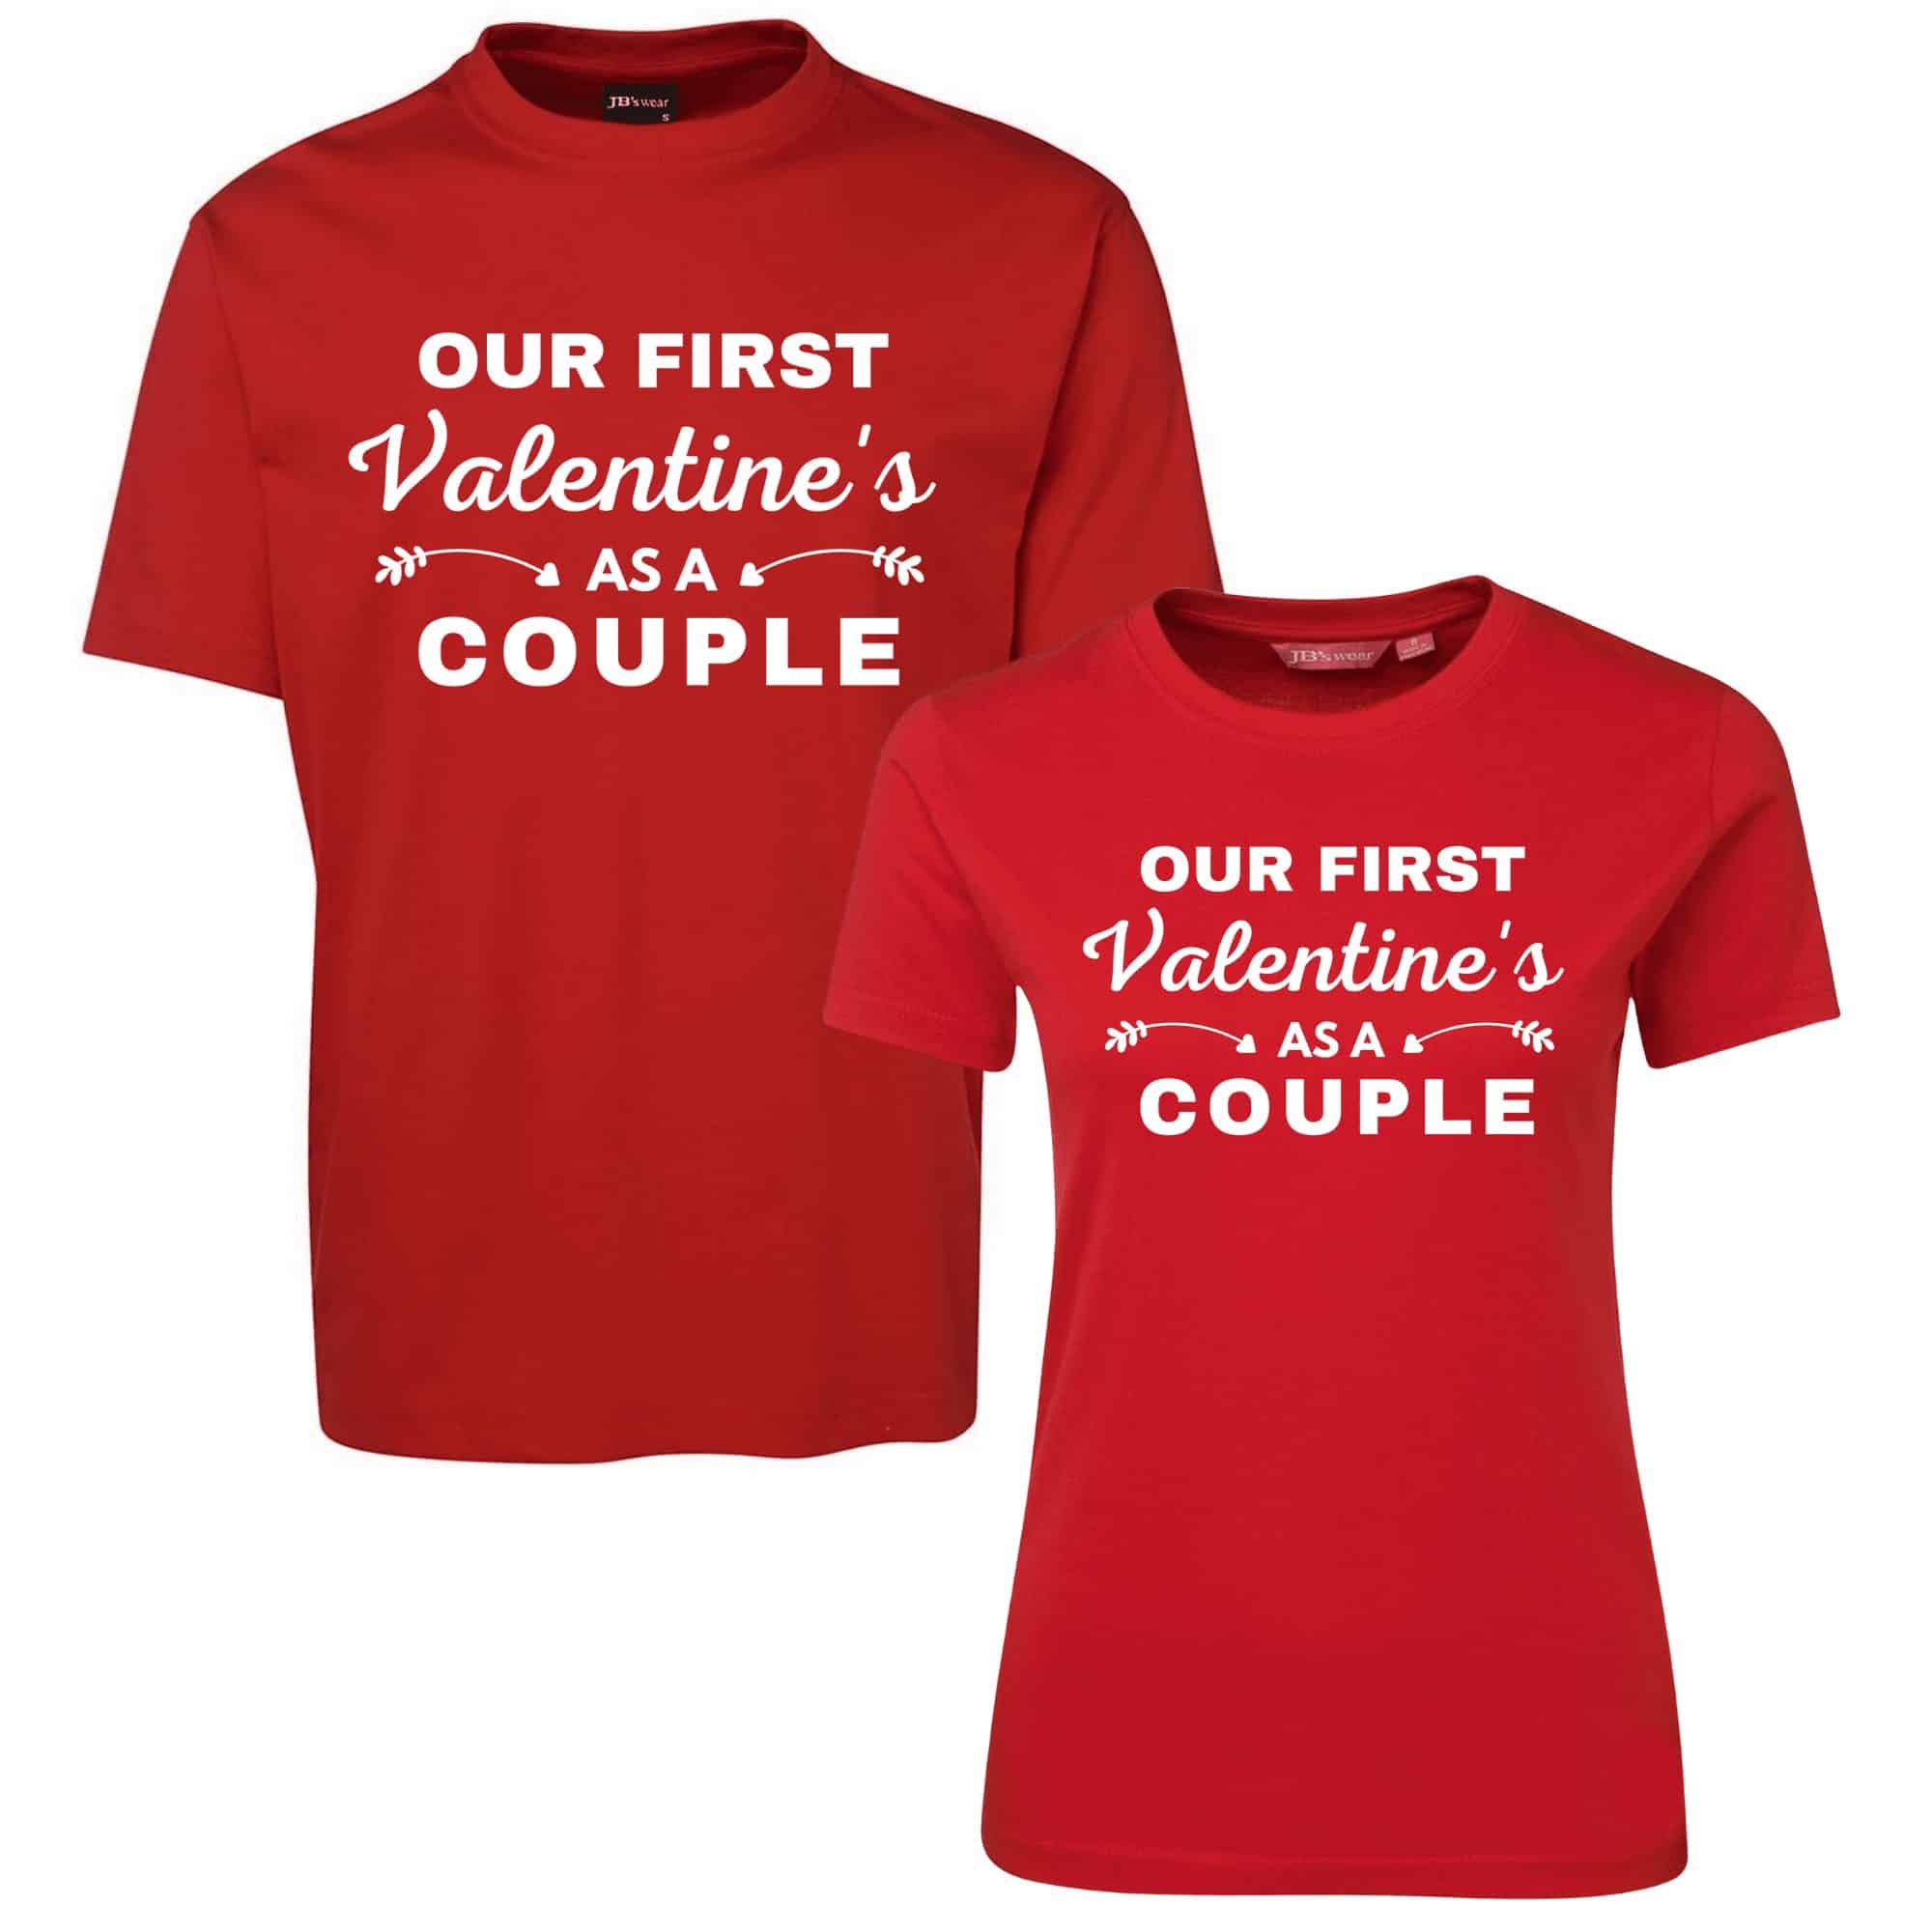 Our-Firts-Valentine-as-Couple-Set